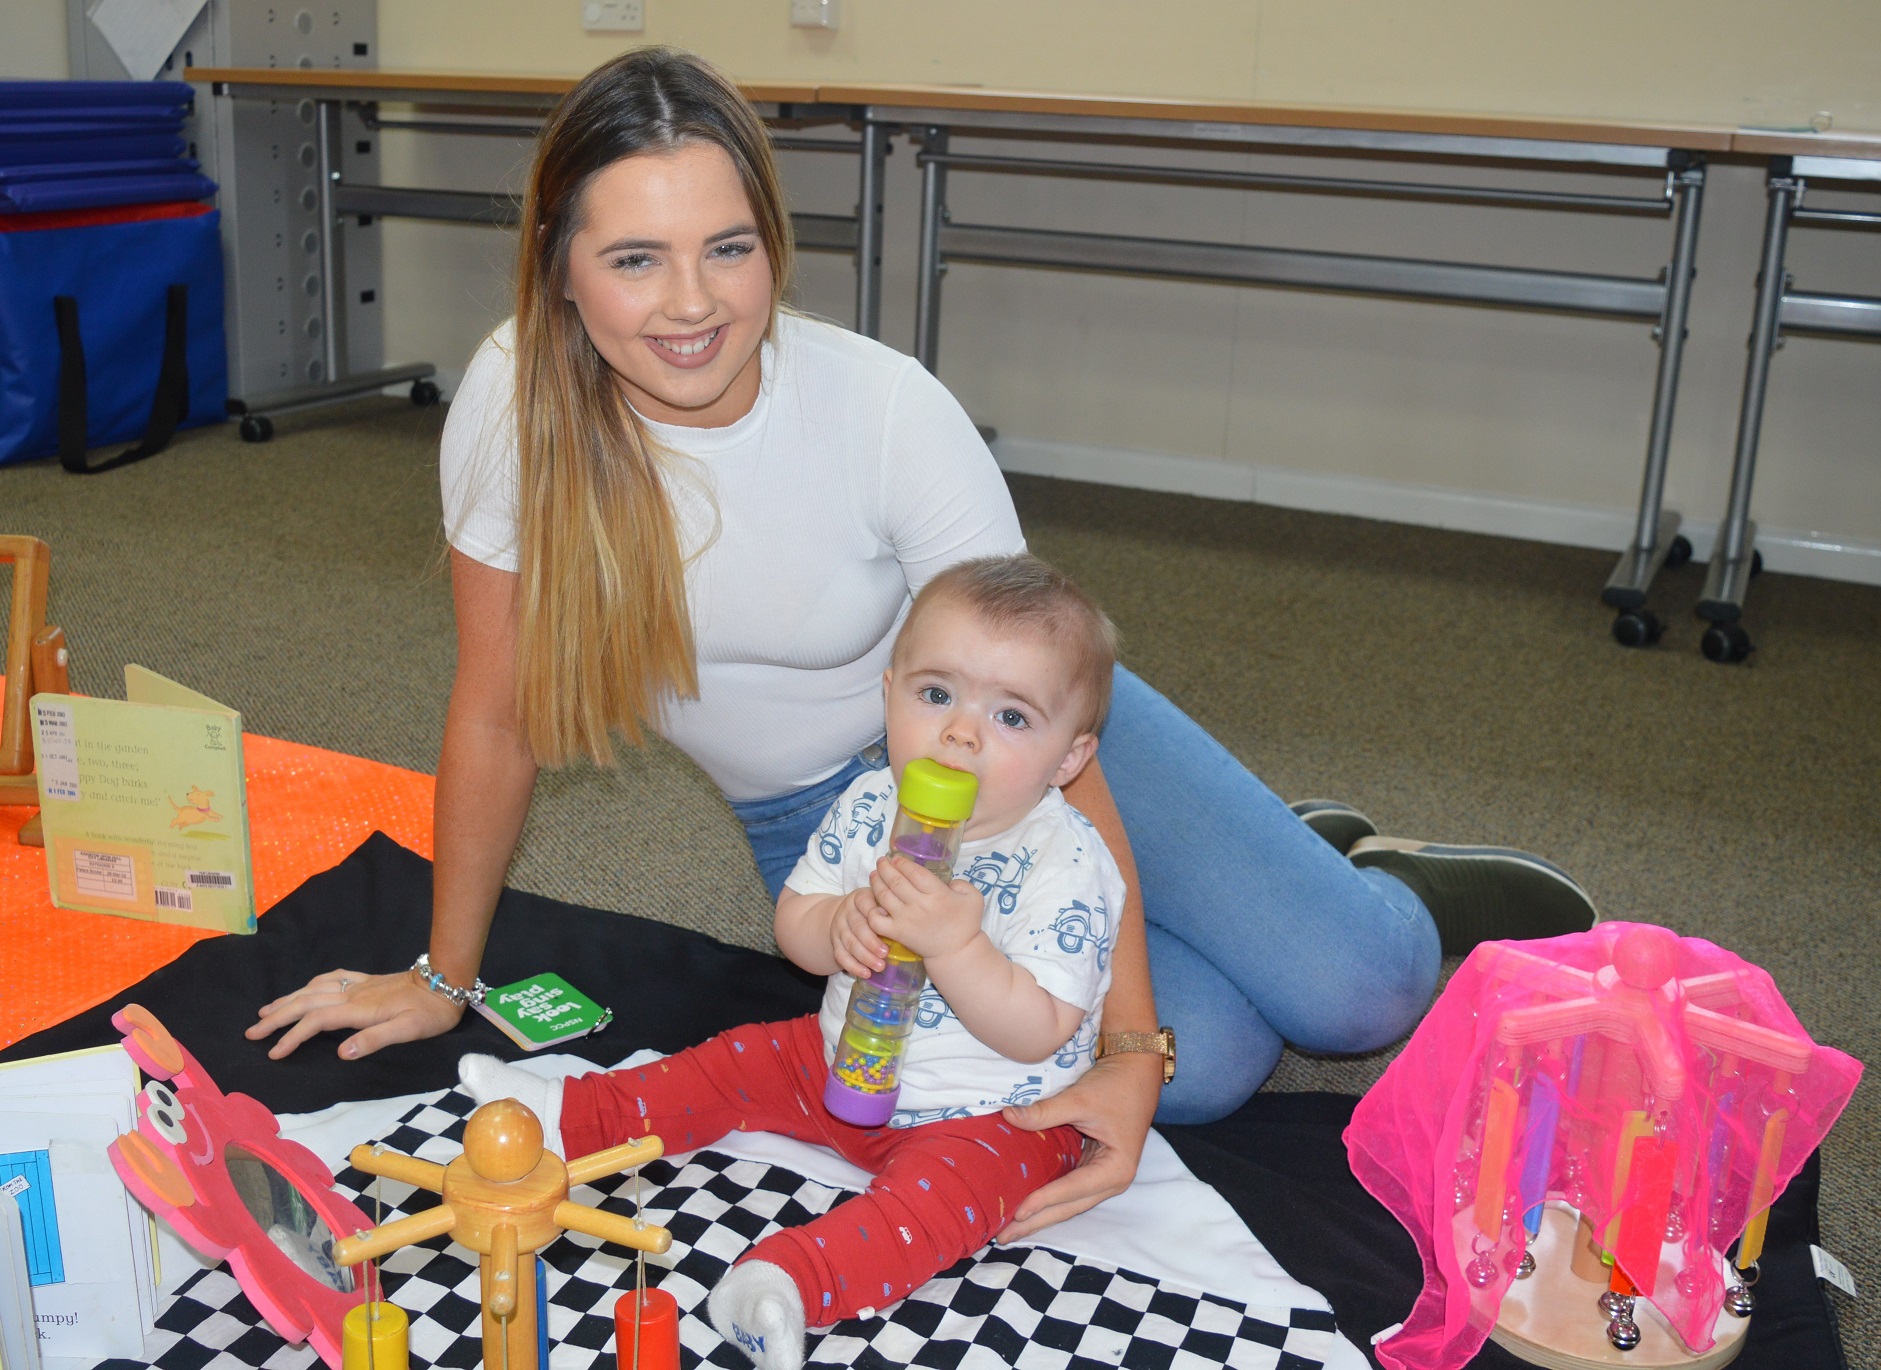 Laura has signed up for Look, Say, Sing, Play and says she has already seen the difference in her baby George.